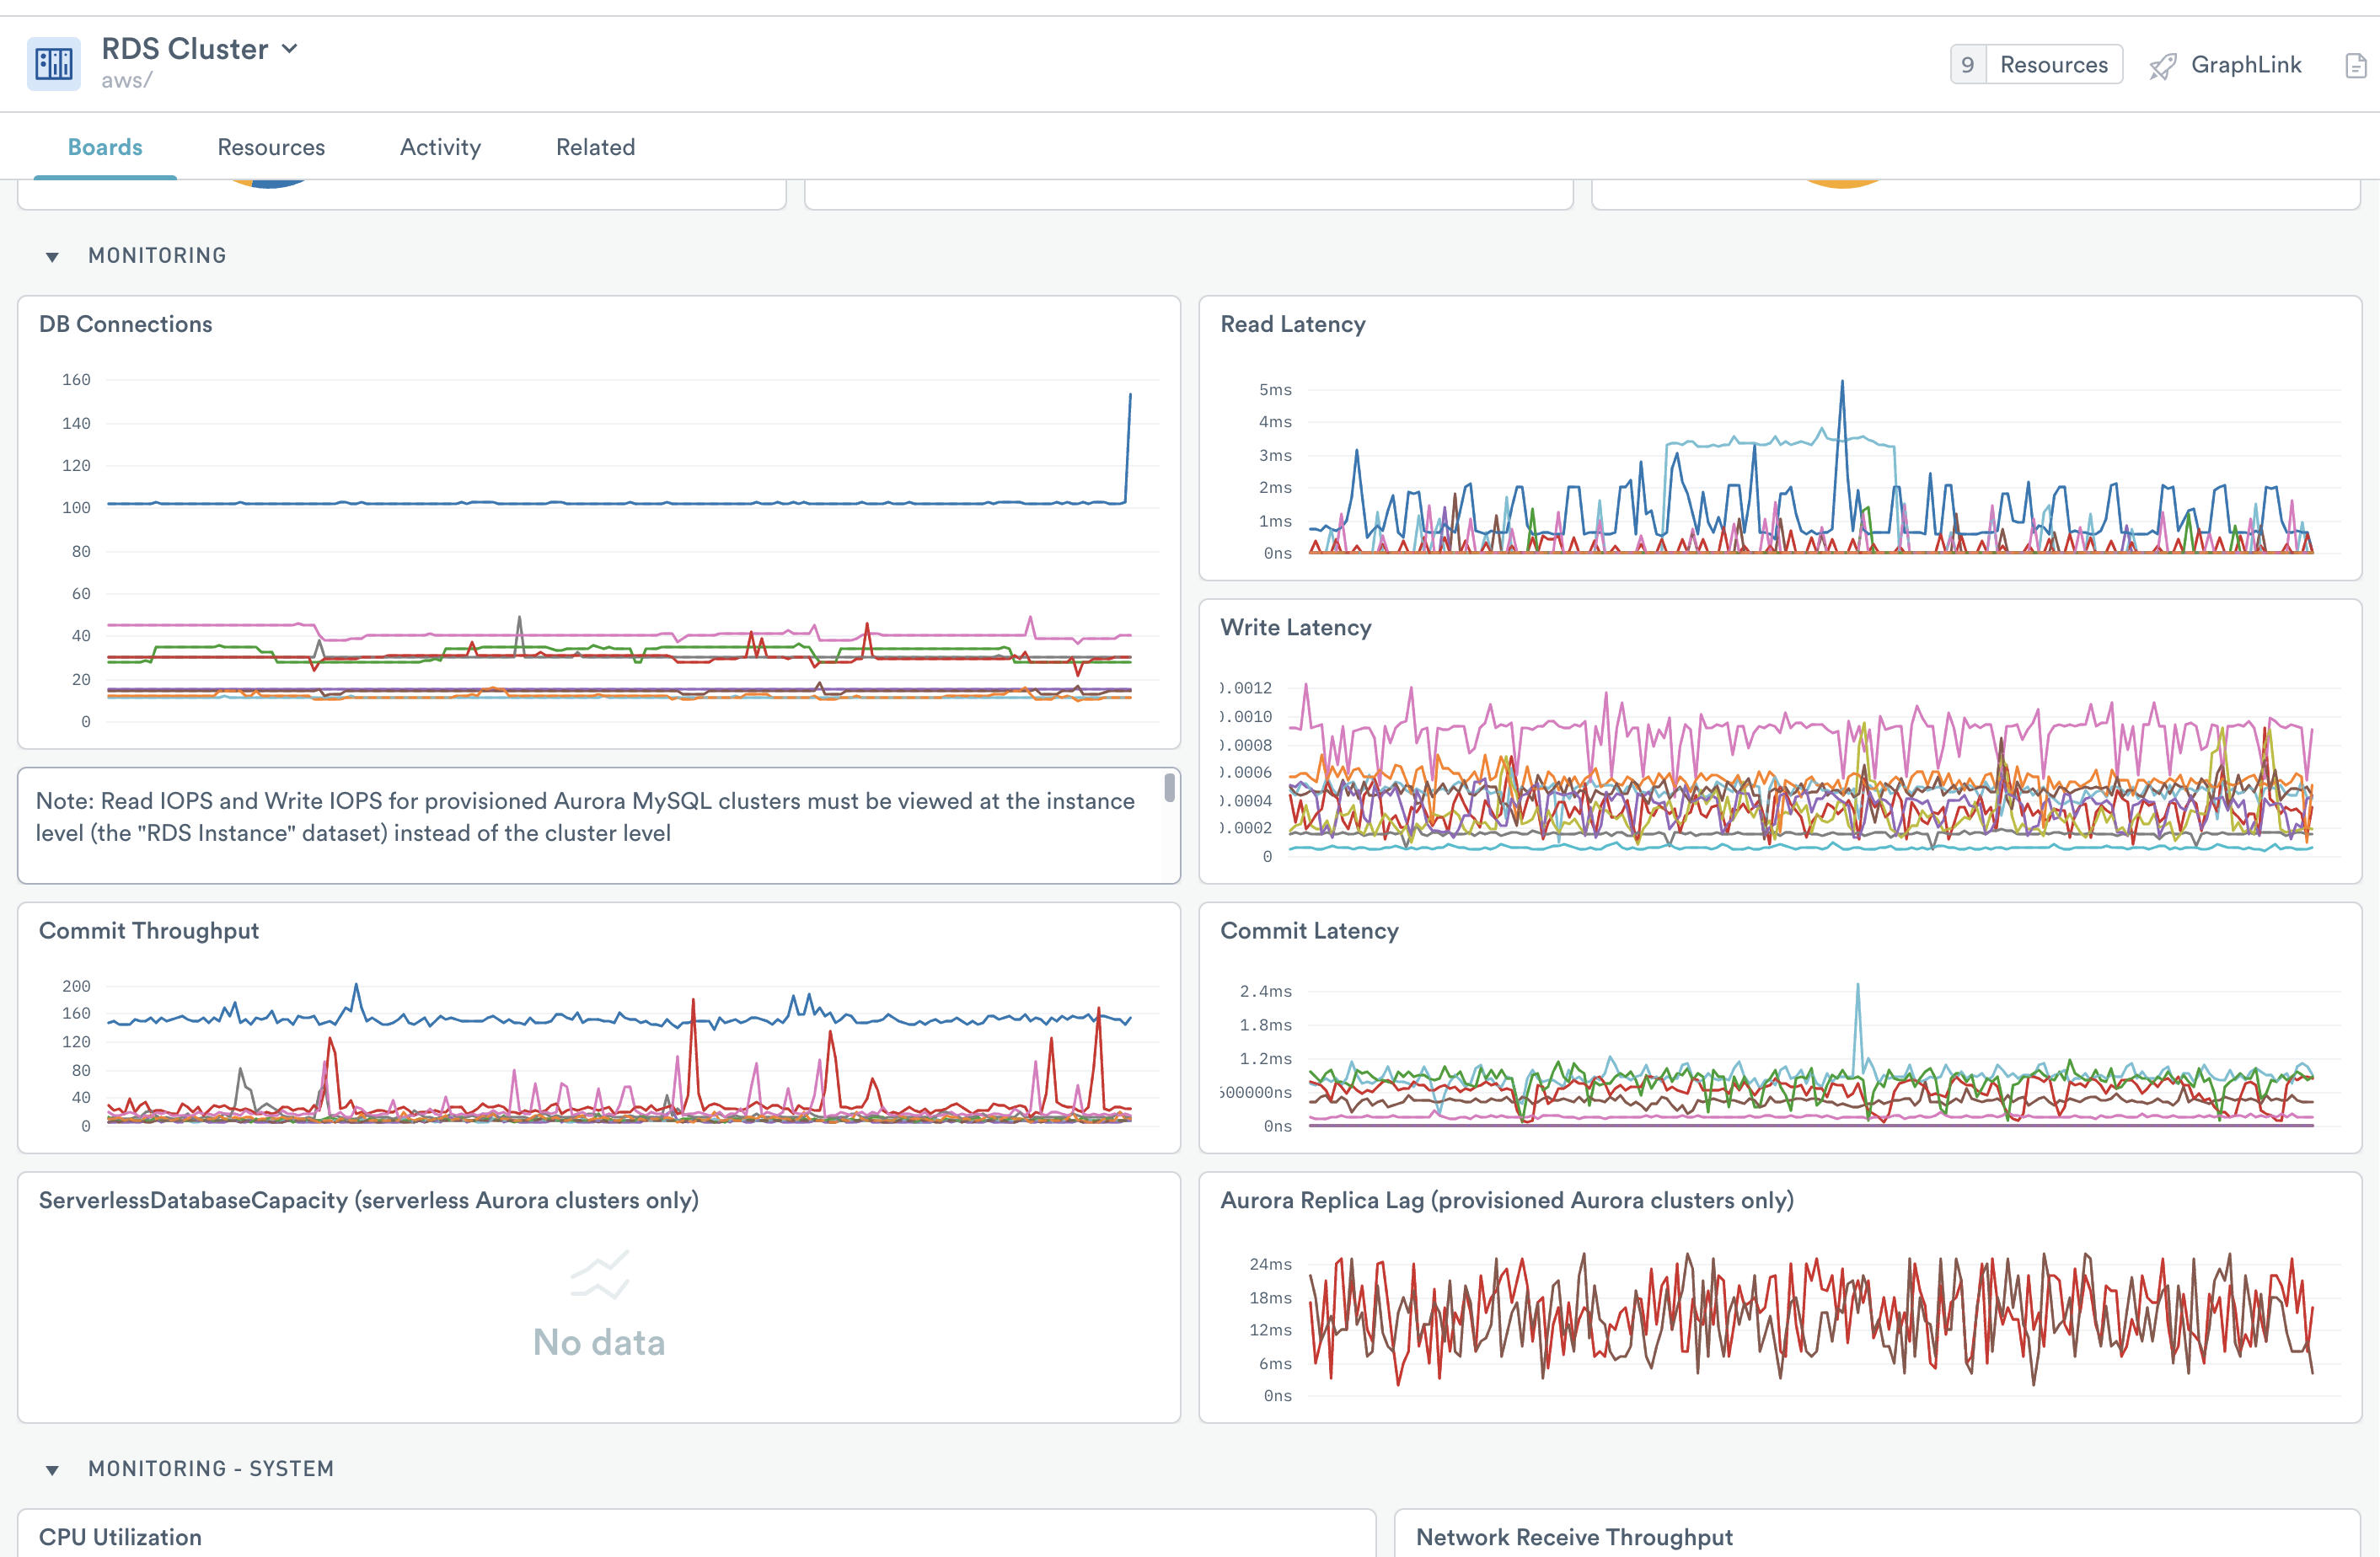 Monitoring board for the EC2 Instance resource dataset. Visualizations include summary of instance types, chart of how many instances are in each availability zone, how many failed status checks, and CPU utilization per instance.